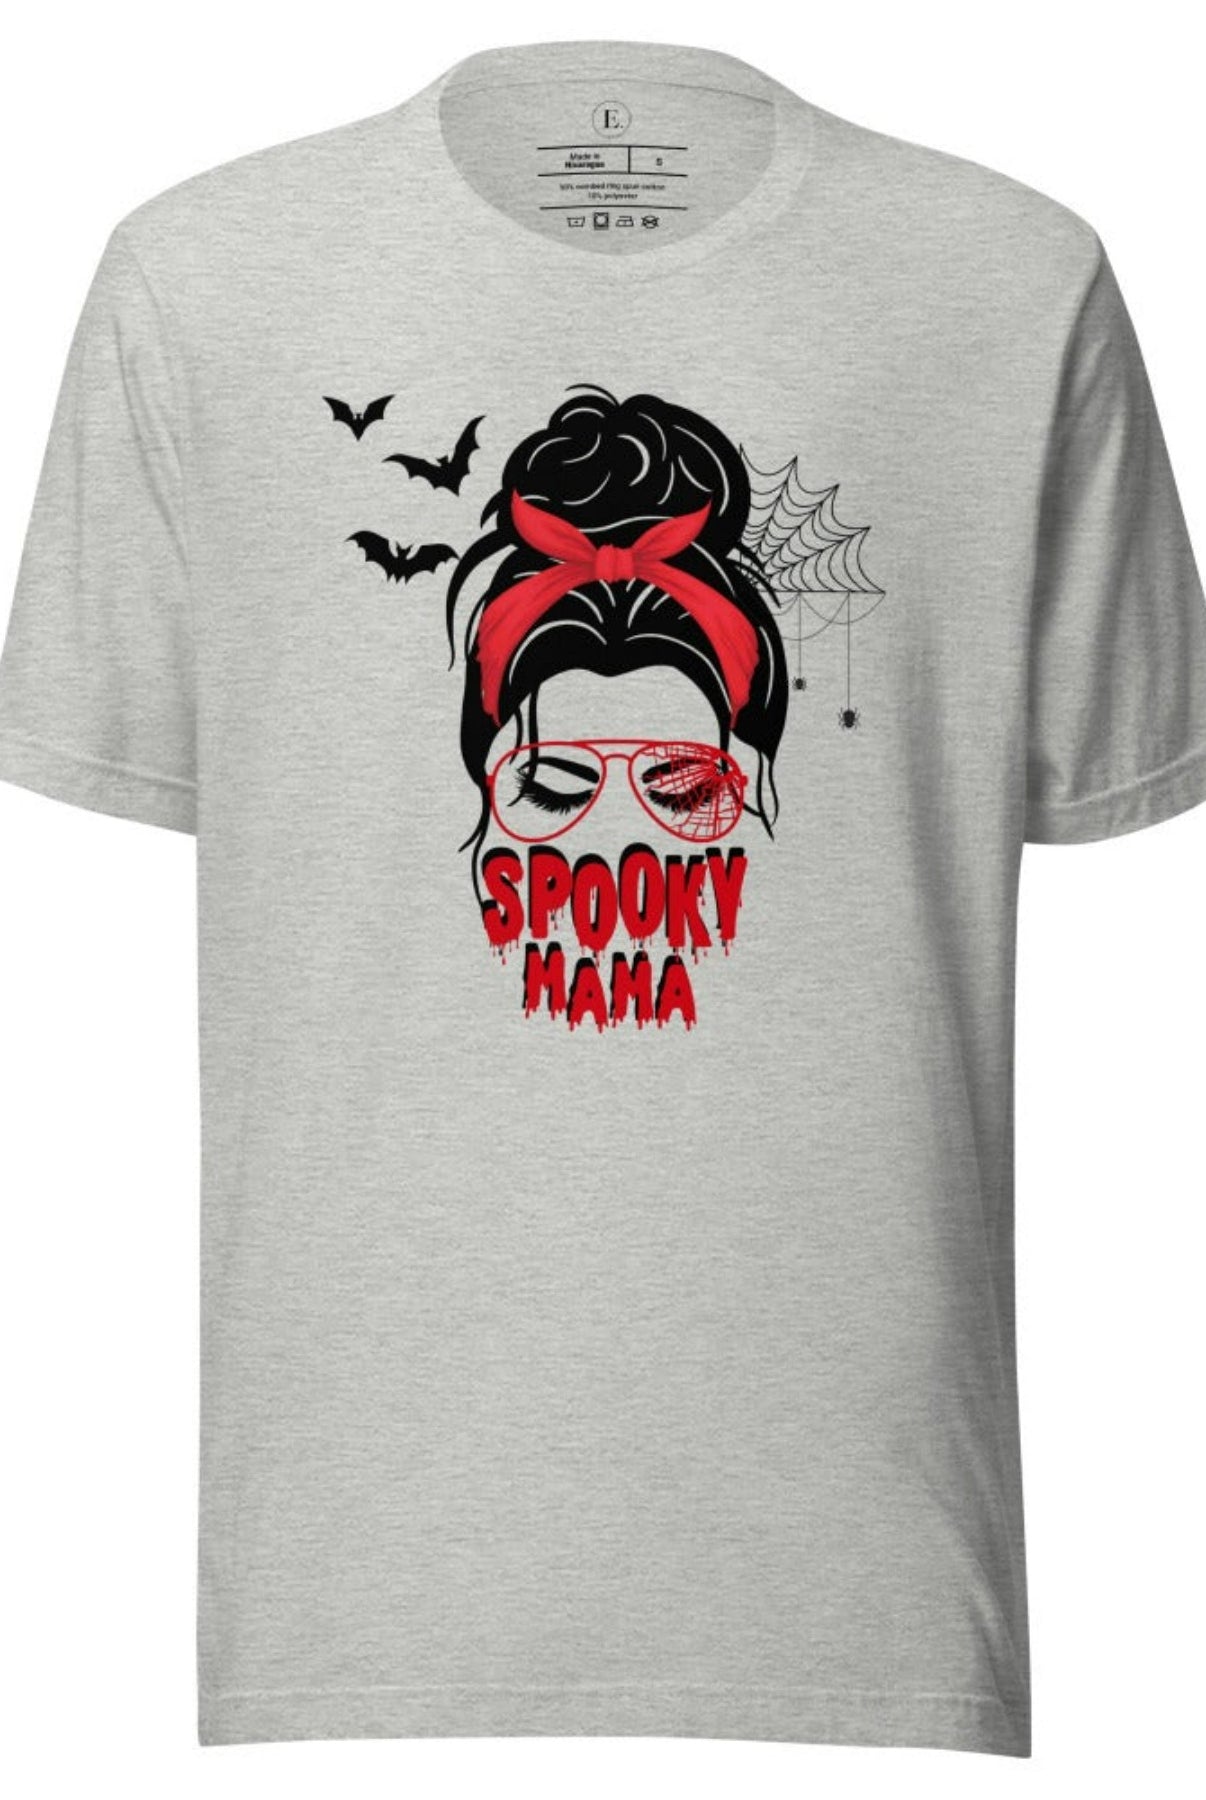 "Spooky Mama" messy bun Halloween T-shirt on athletic heather grey colored t-shirt.